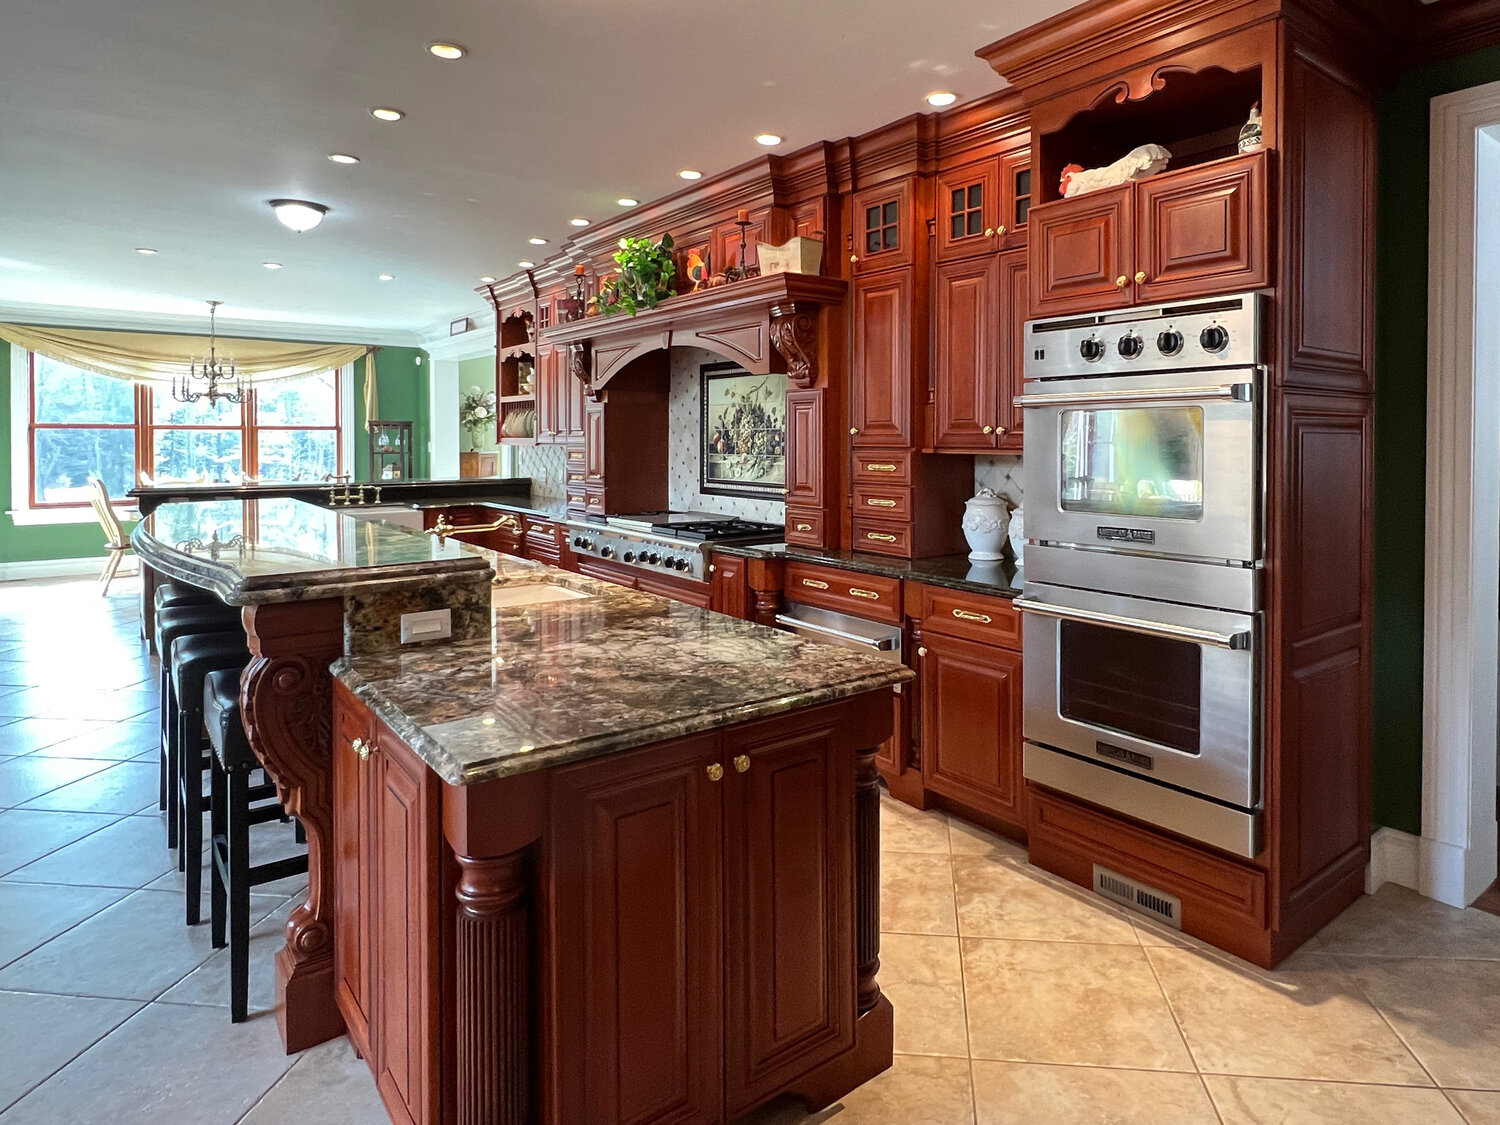 The kitchen has a 60-inch gas cooktop with a grill, plus twin wall ovens...